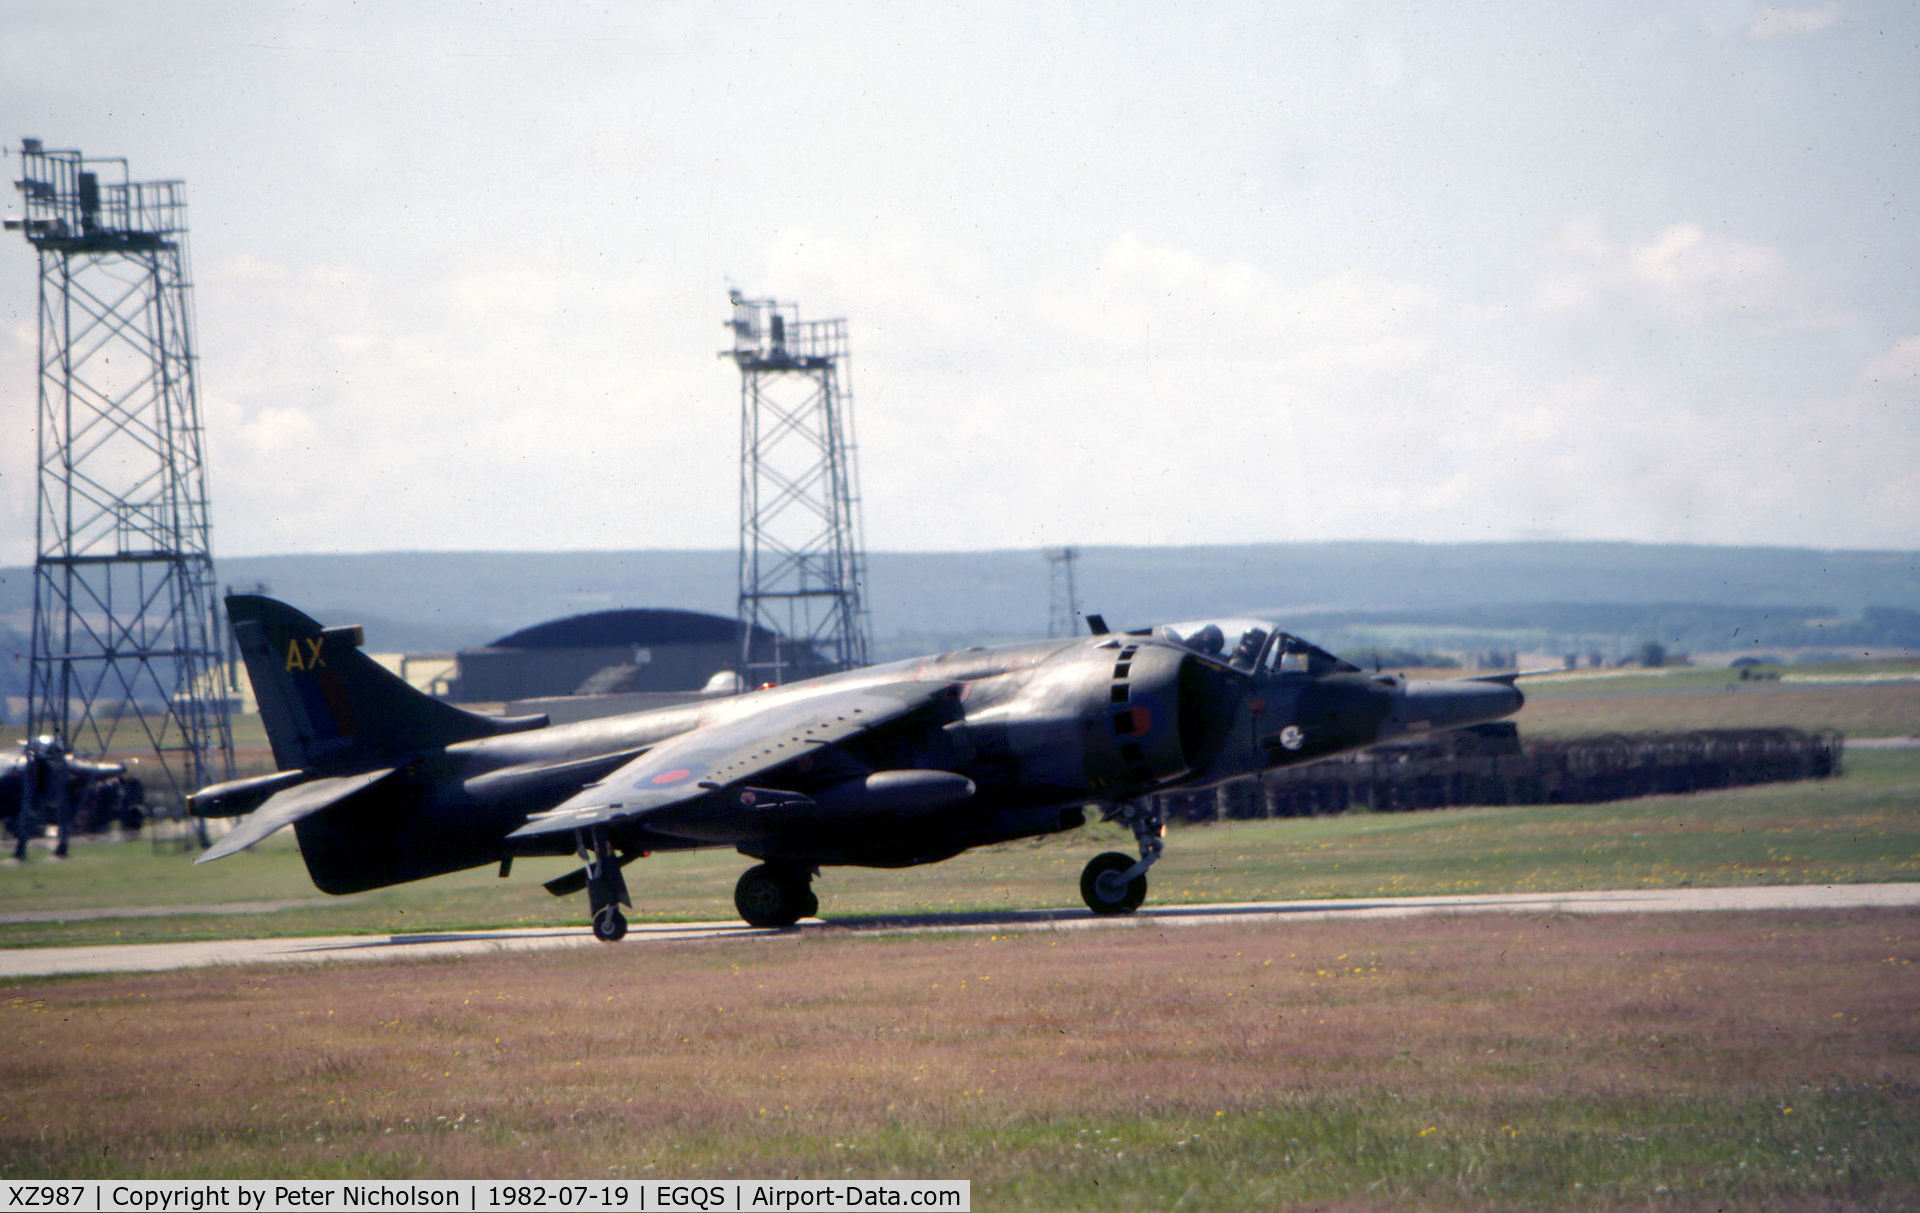 XZ987, 1981 British Aerospace Harrier GR.3 C/N 712210, Harrier GR.3 of 3 Squadron preparing to join the active runway at RAF Lossiemouth in the Summer of 1982.